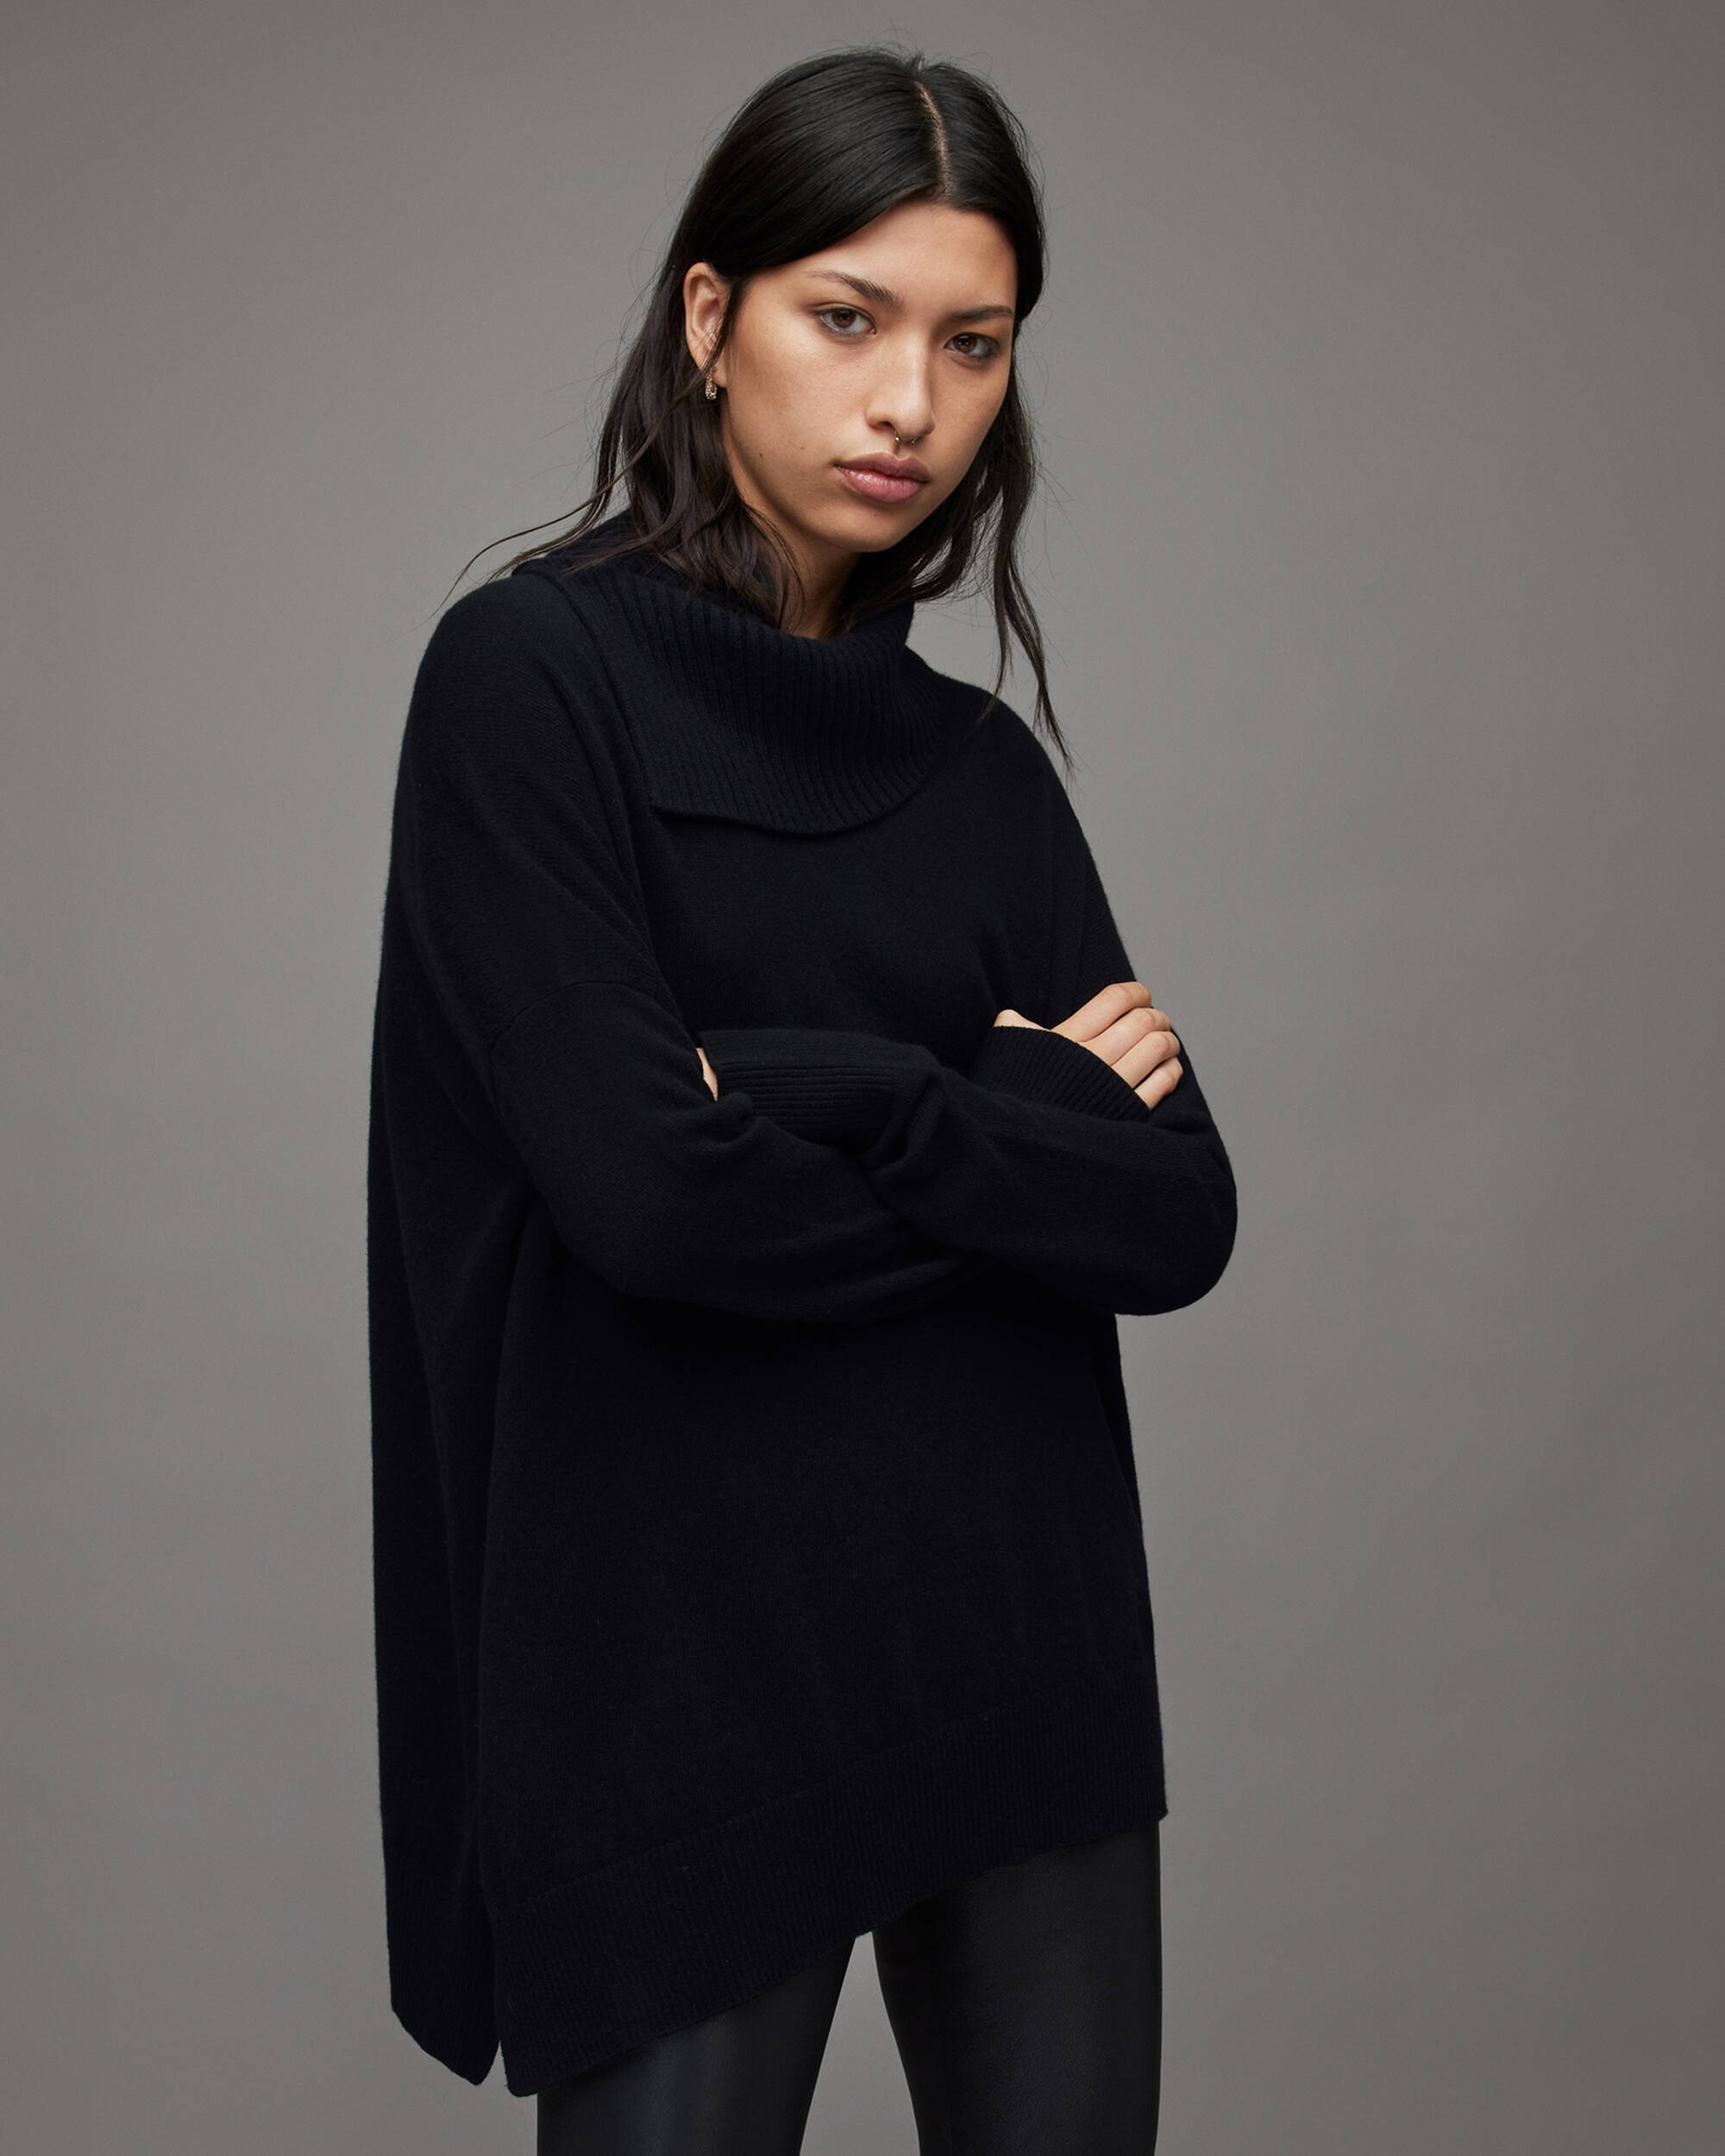 Whitby Cashmere Wool Sweater Black | ALLSAINTS US